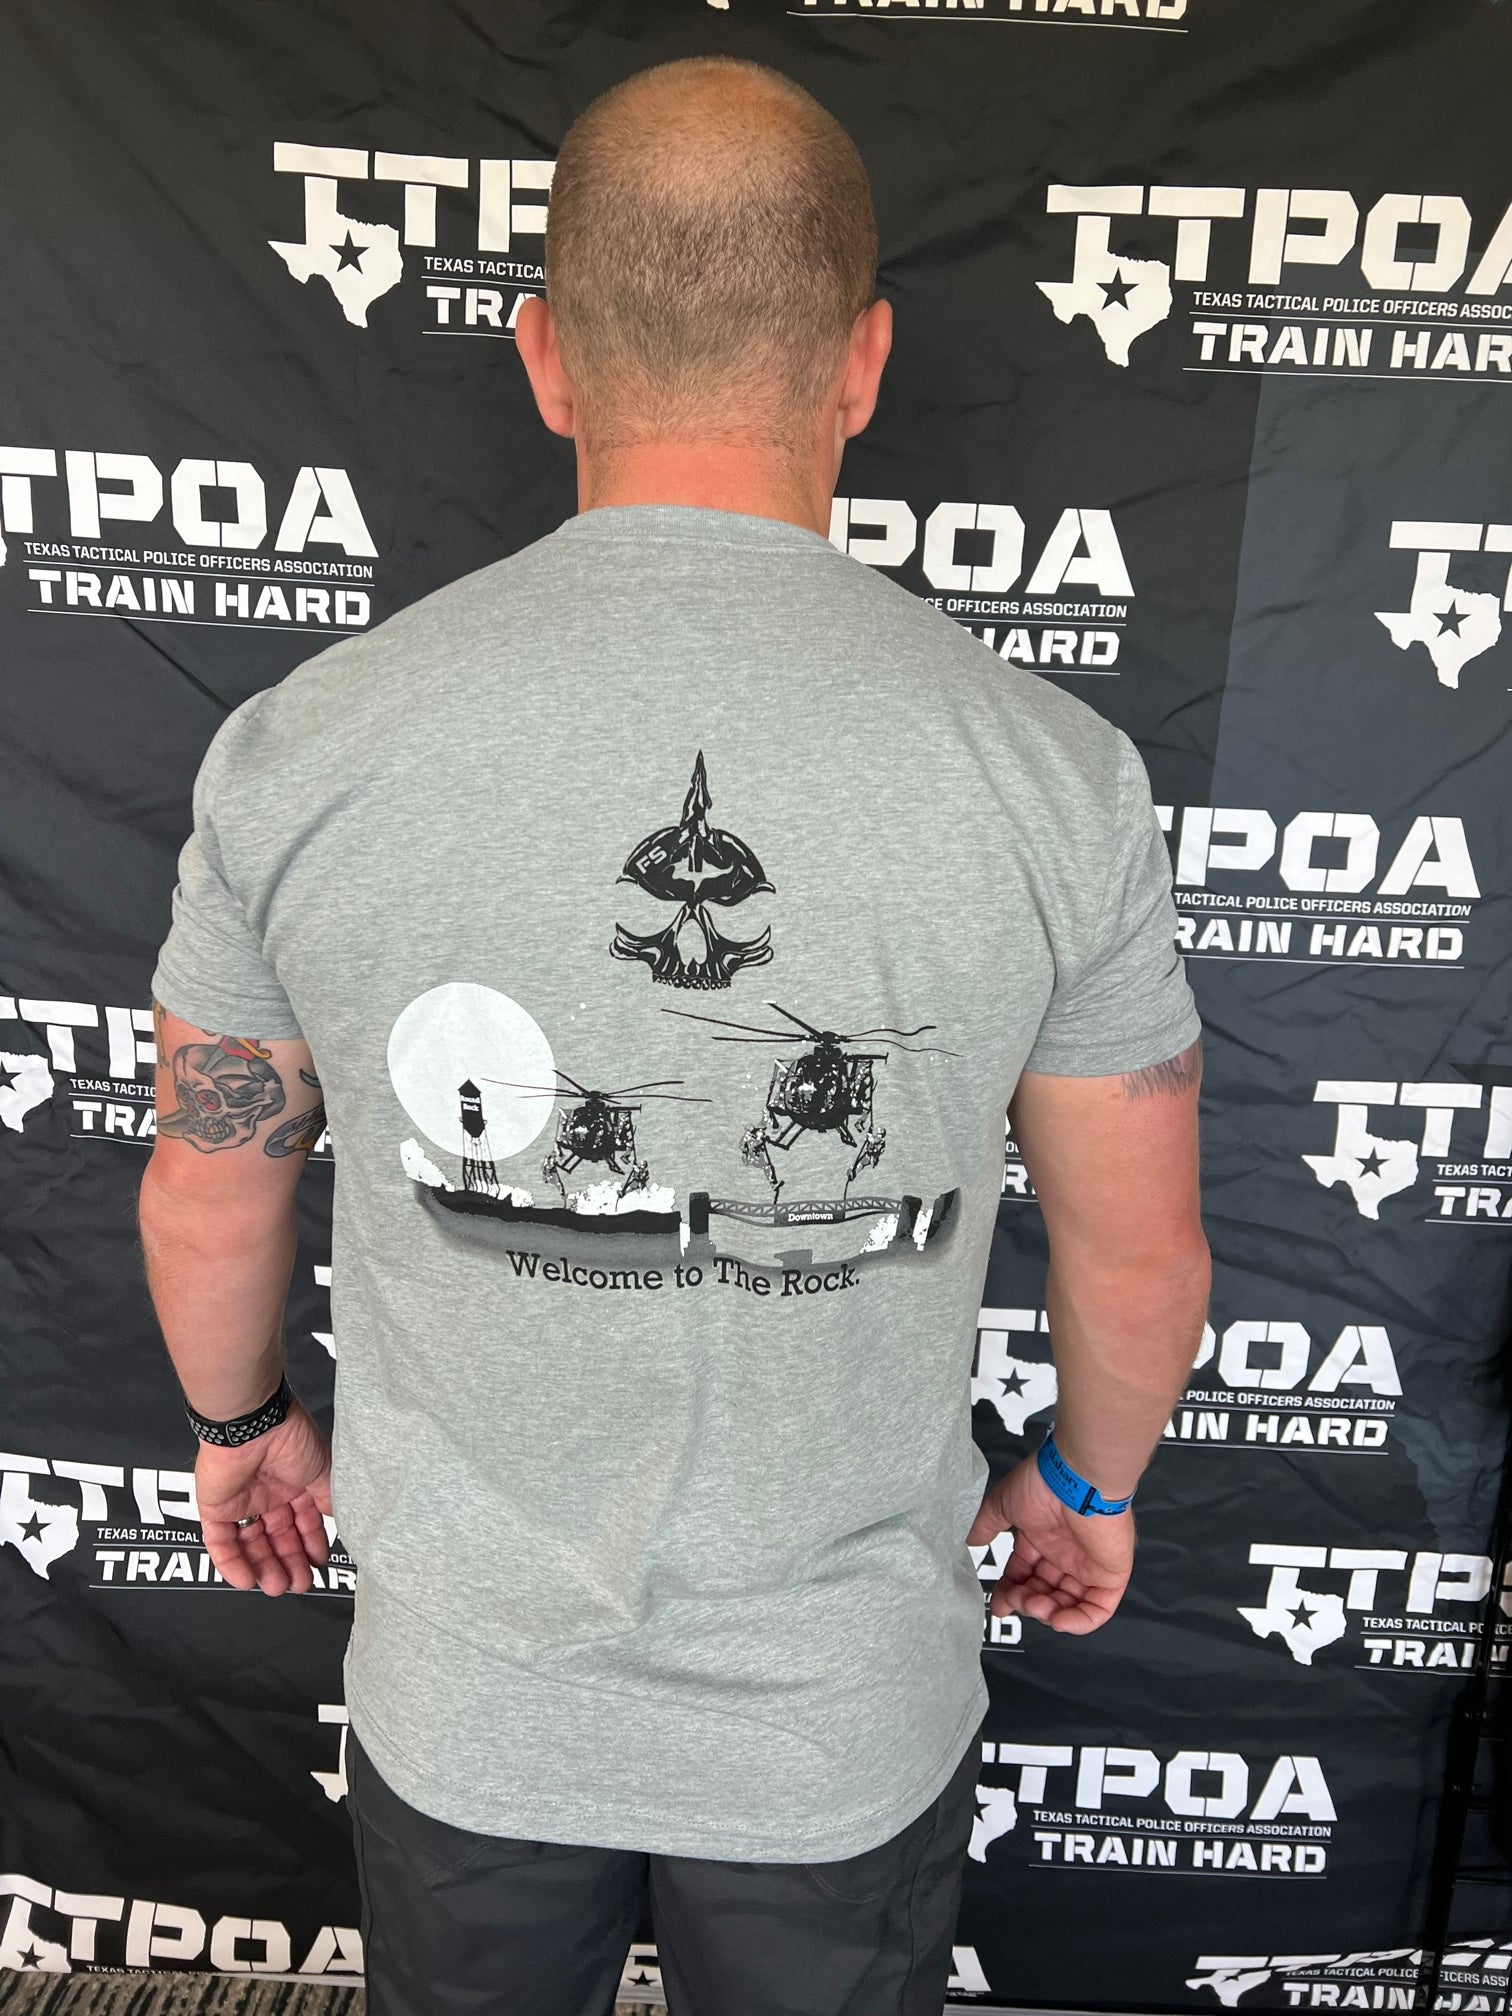 2022 TTPOA SWAT Conference T-Shirt - Sponsored by FirstSpear